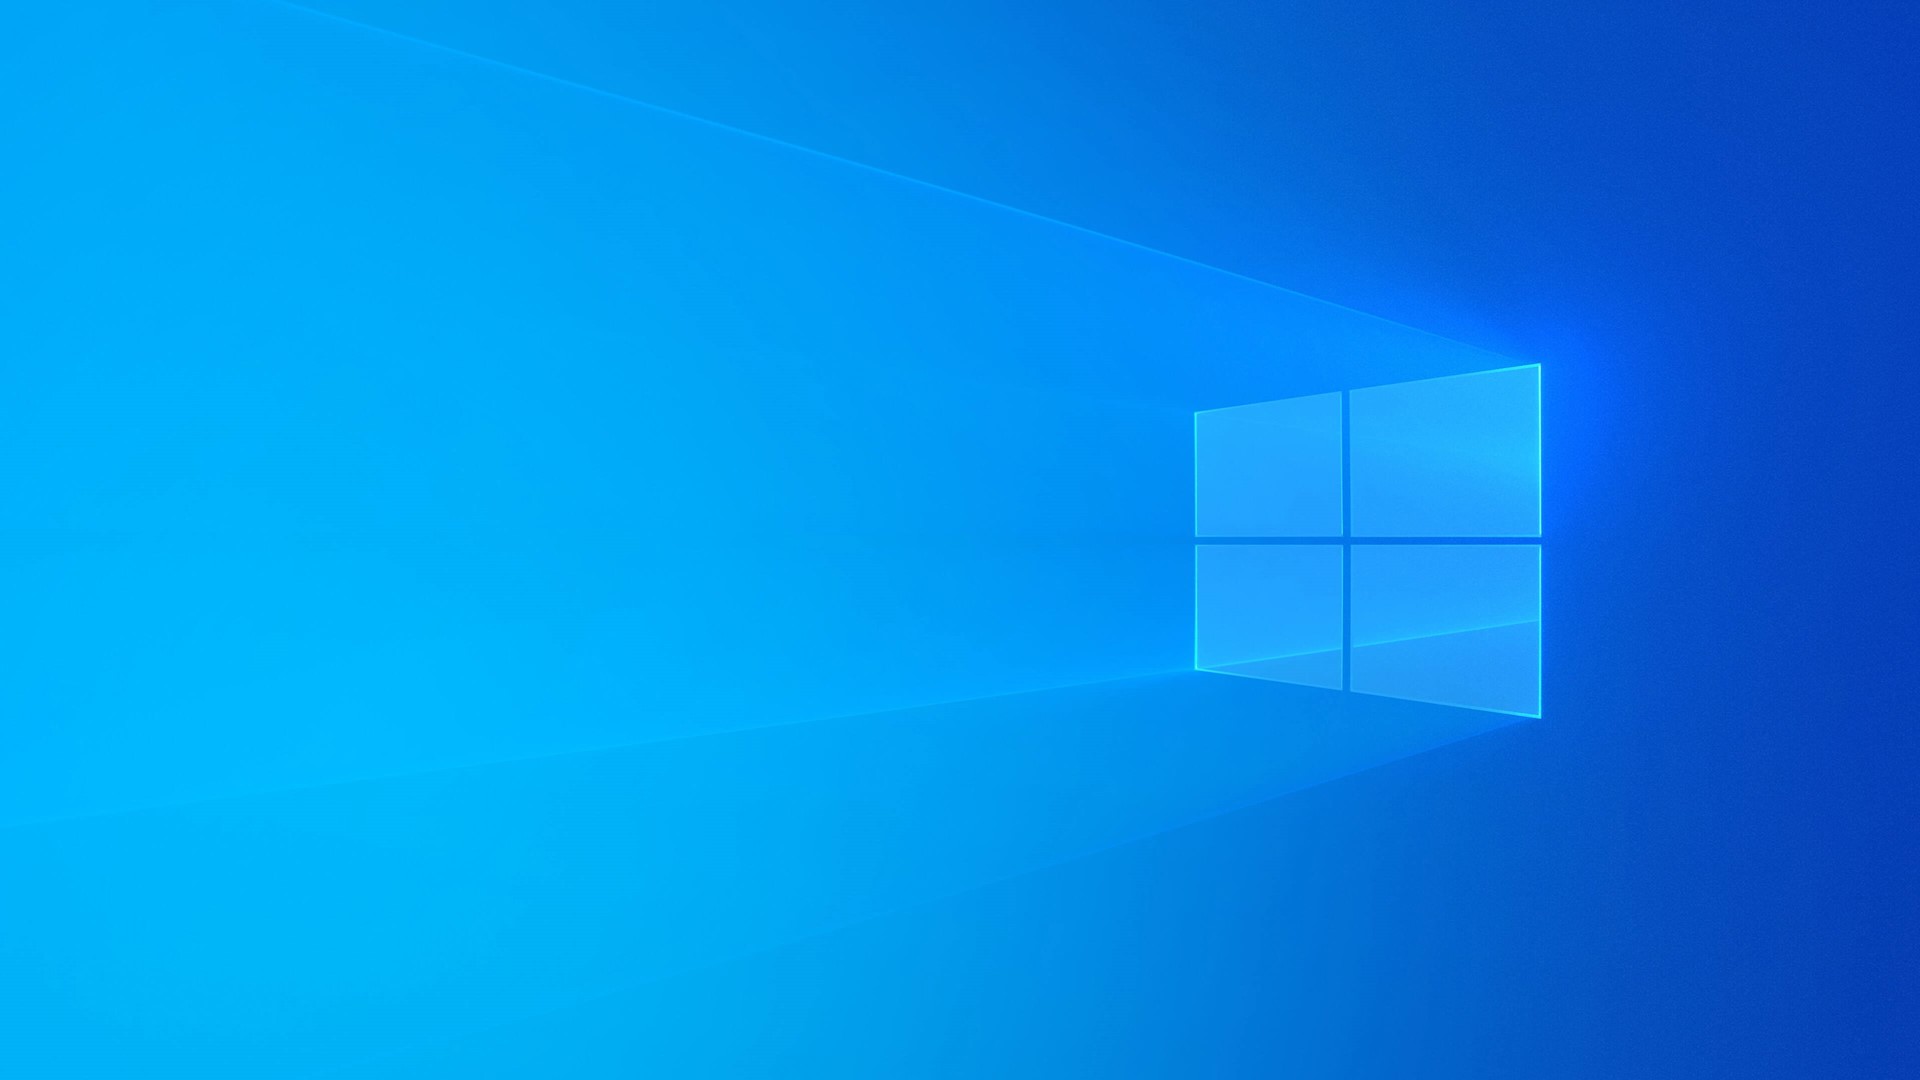 New default windows light theme wallpaper now available at wallpaperhub at k resolution